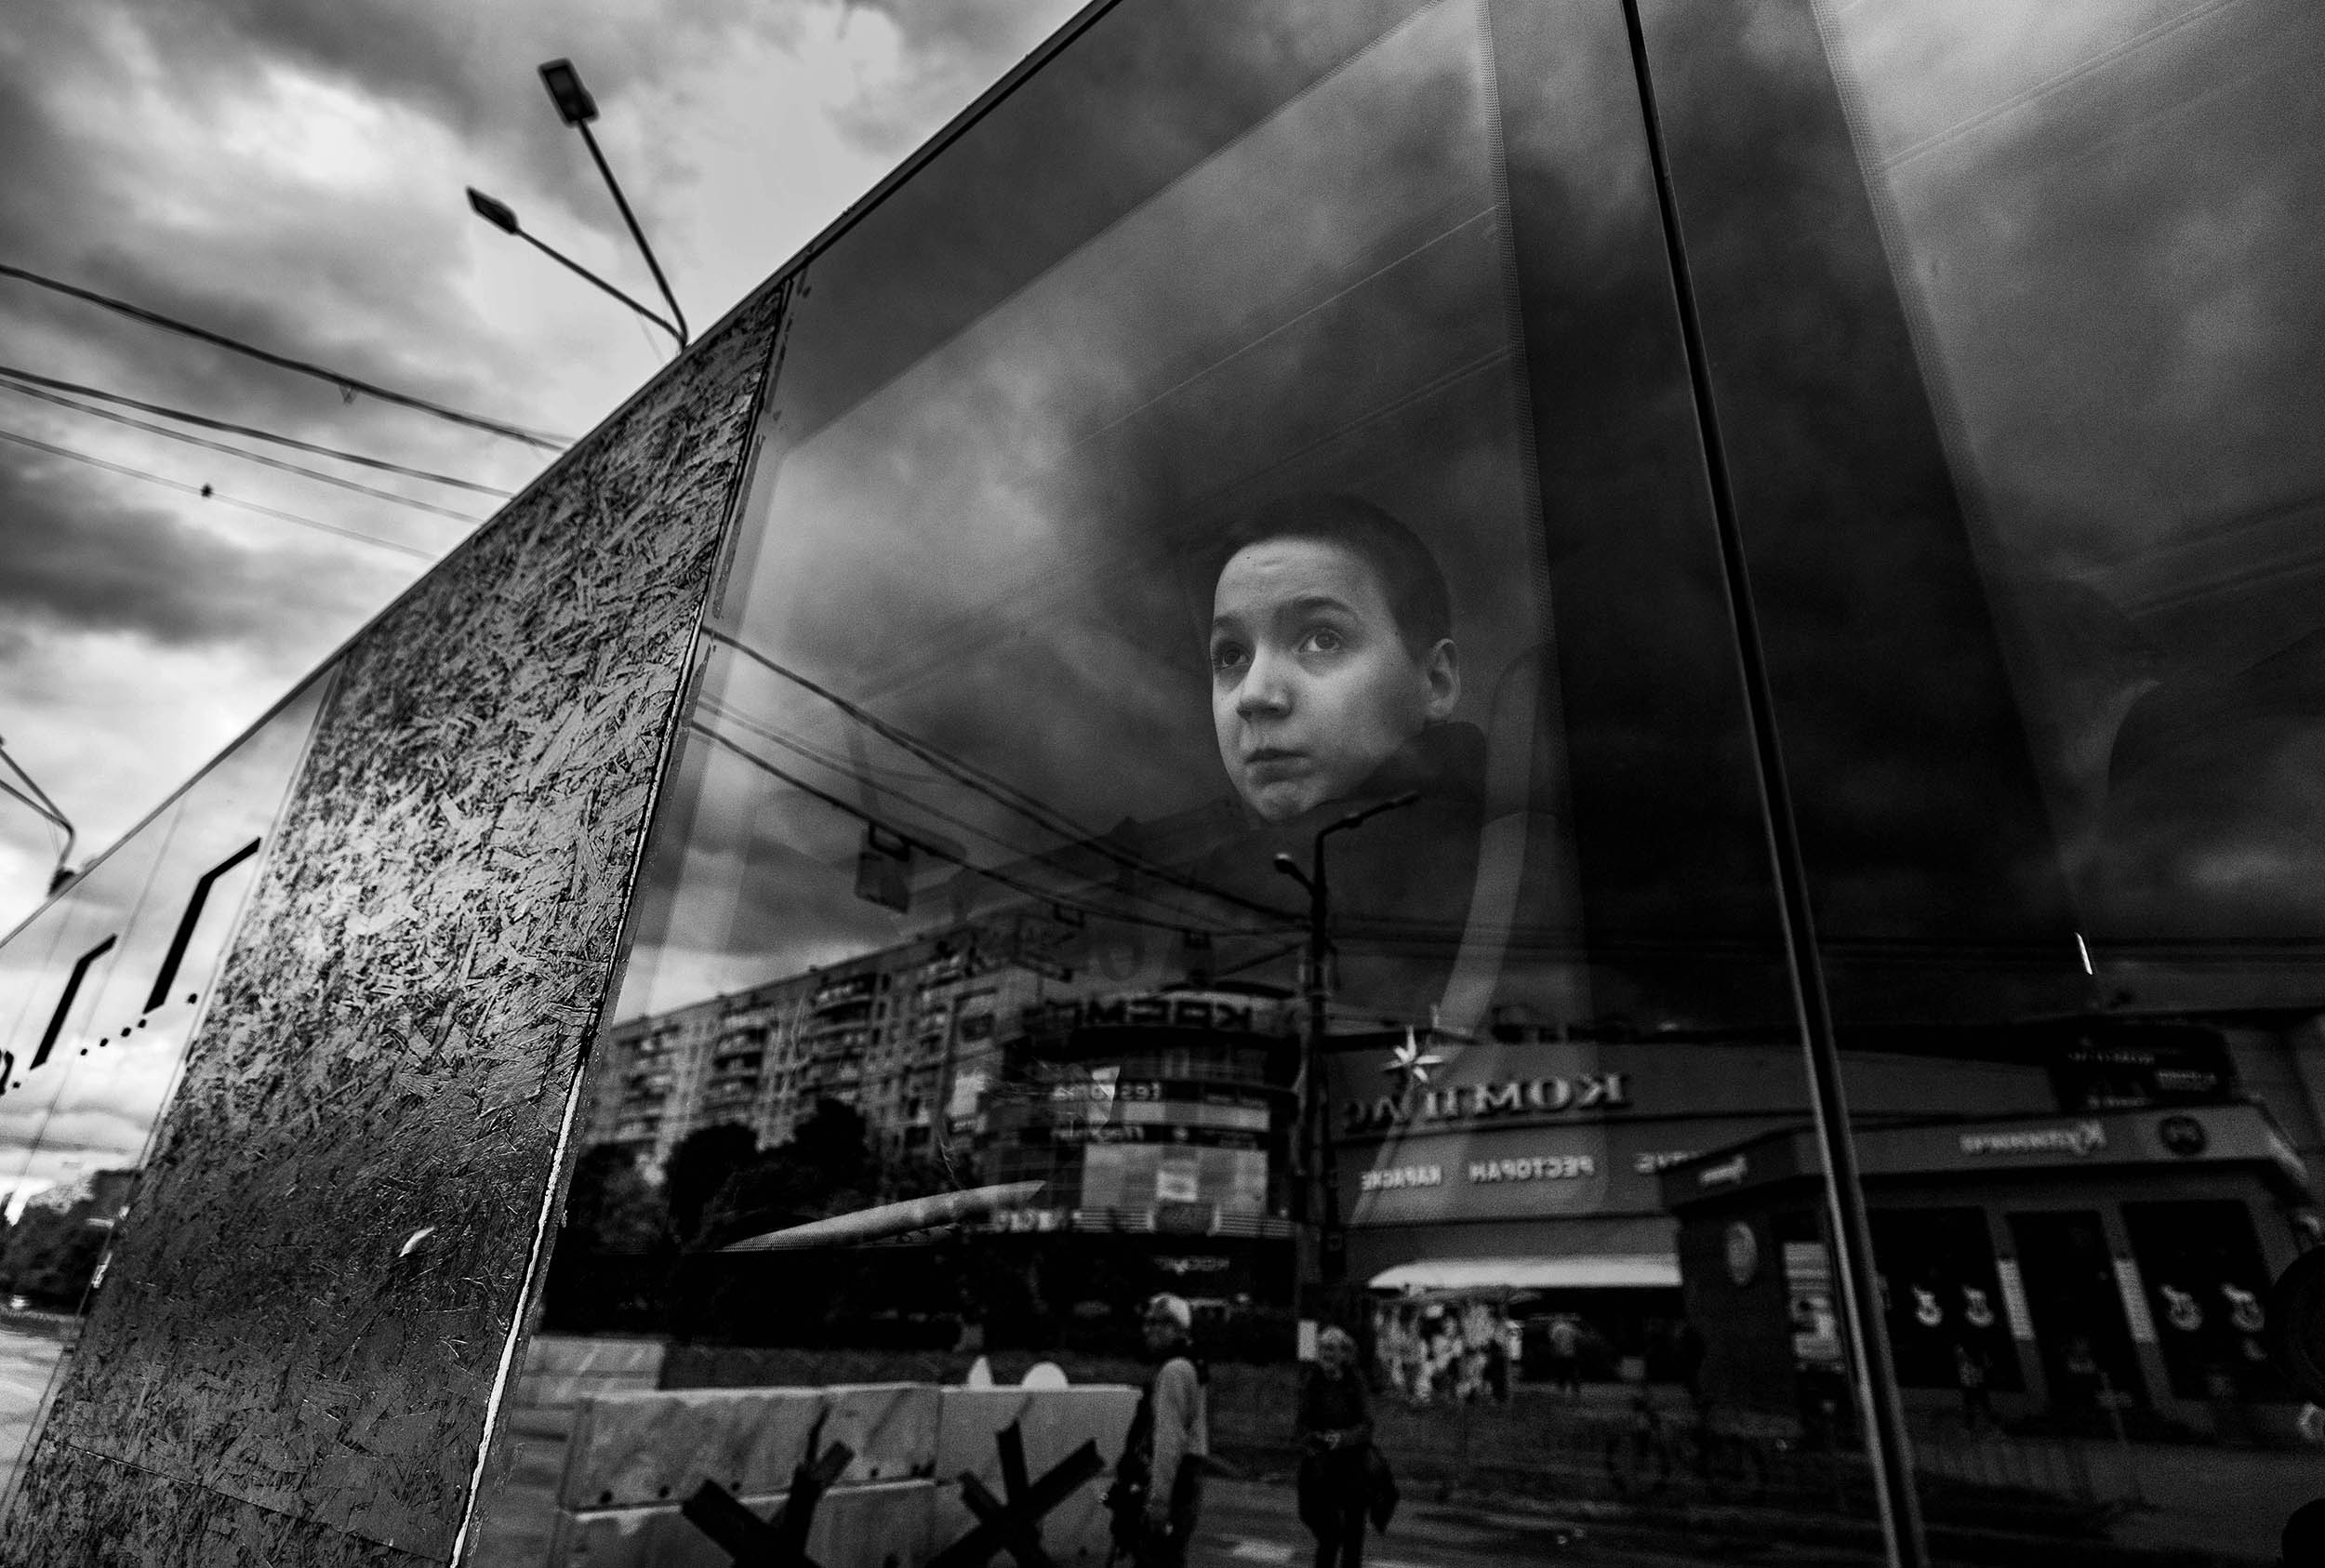 A young boy looks out the bus window after leaving the Kharkiv metro station on May 22, 2022, after seeking shelter there for three months following Russians invasion of Ukraine of Ukraine on February 24, 2022.